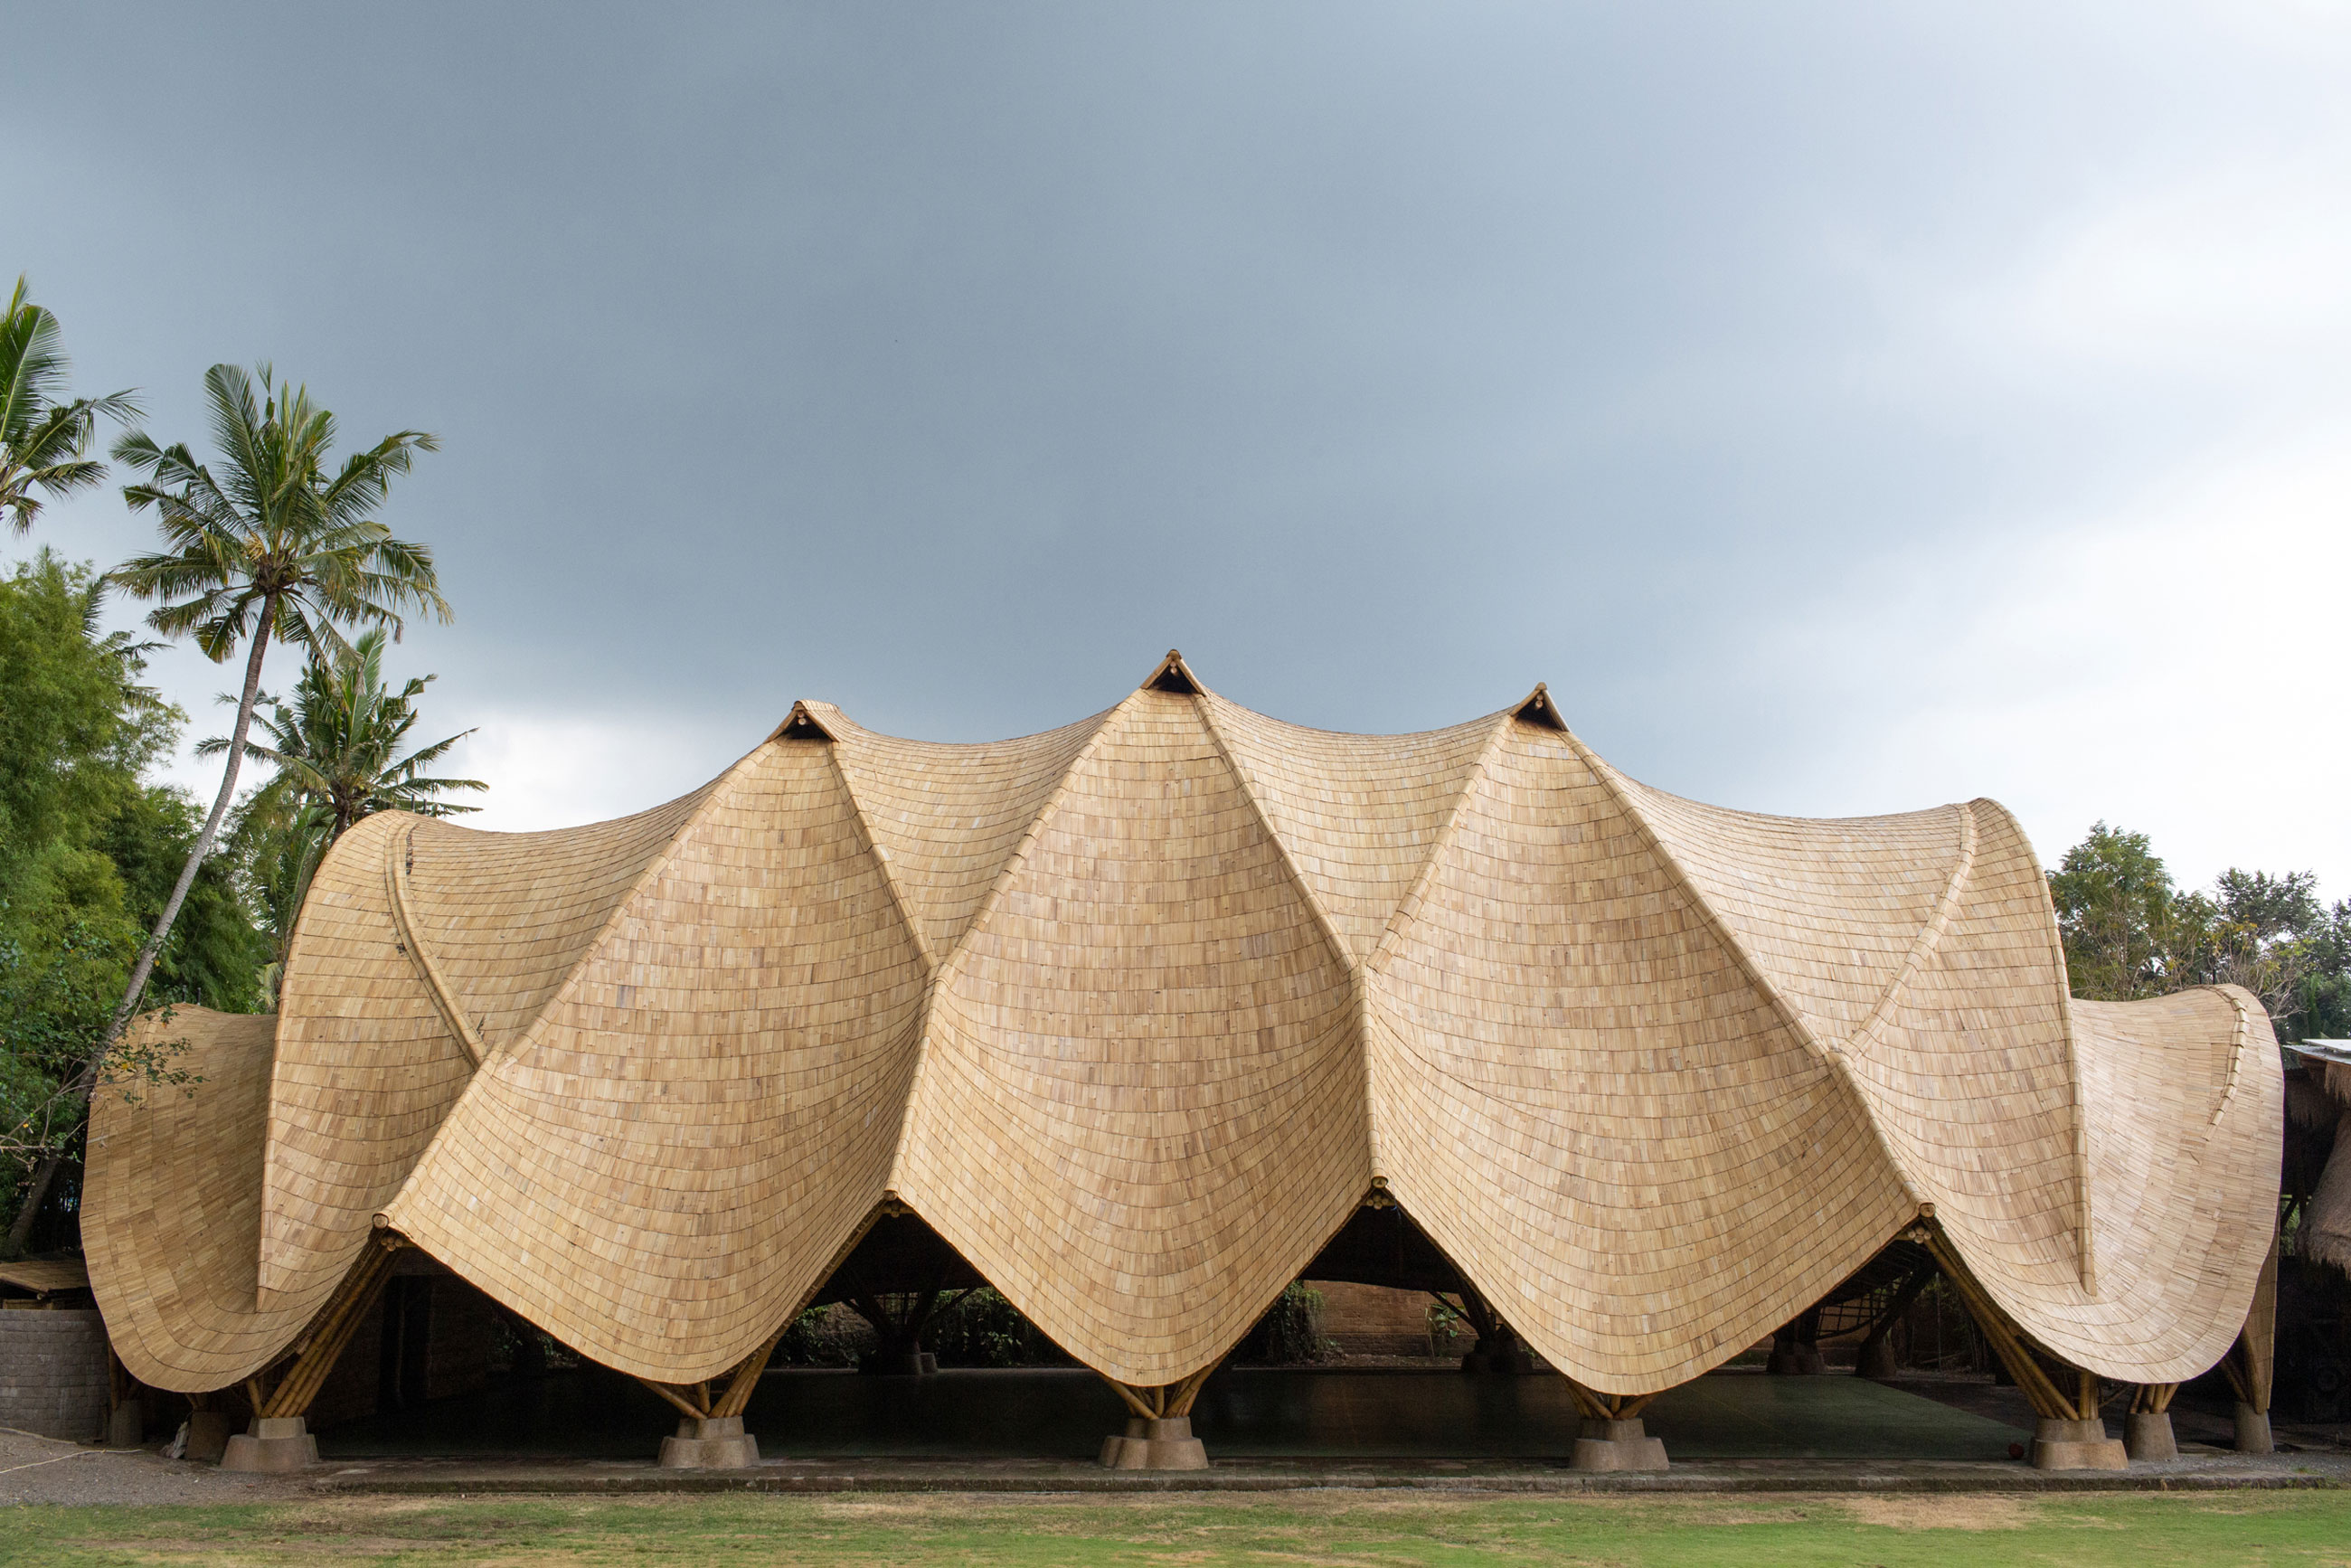 The Arc at Green School is a bamboo masterpiece set in Bali, Indonesia